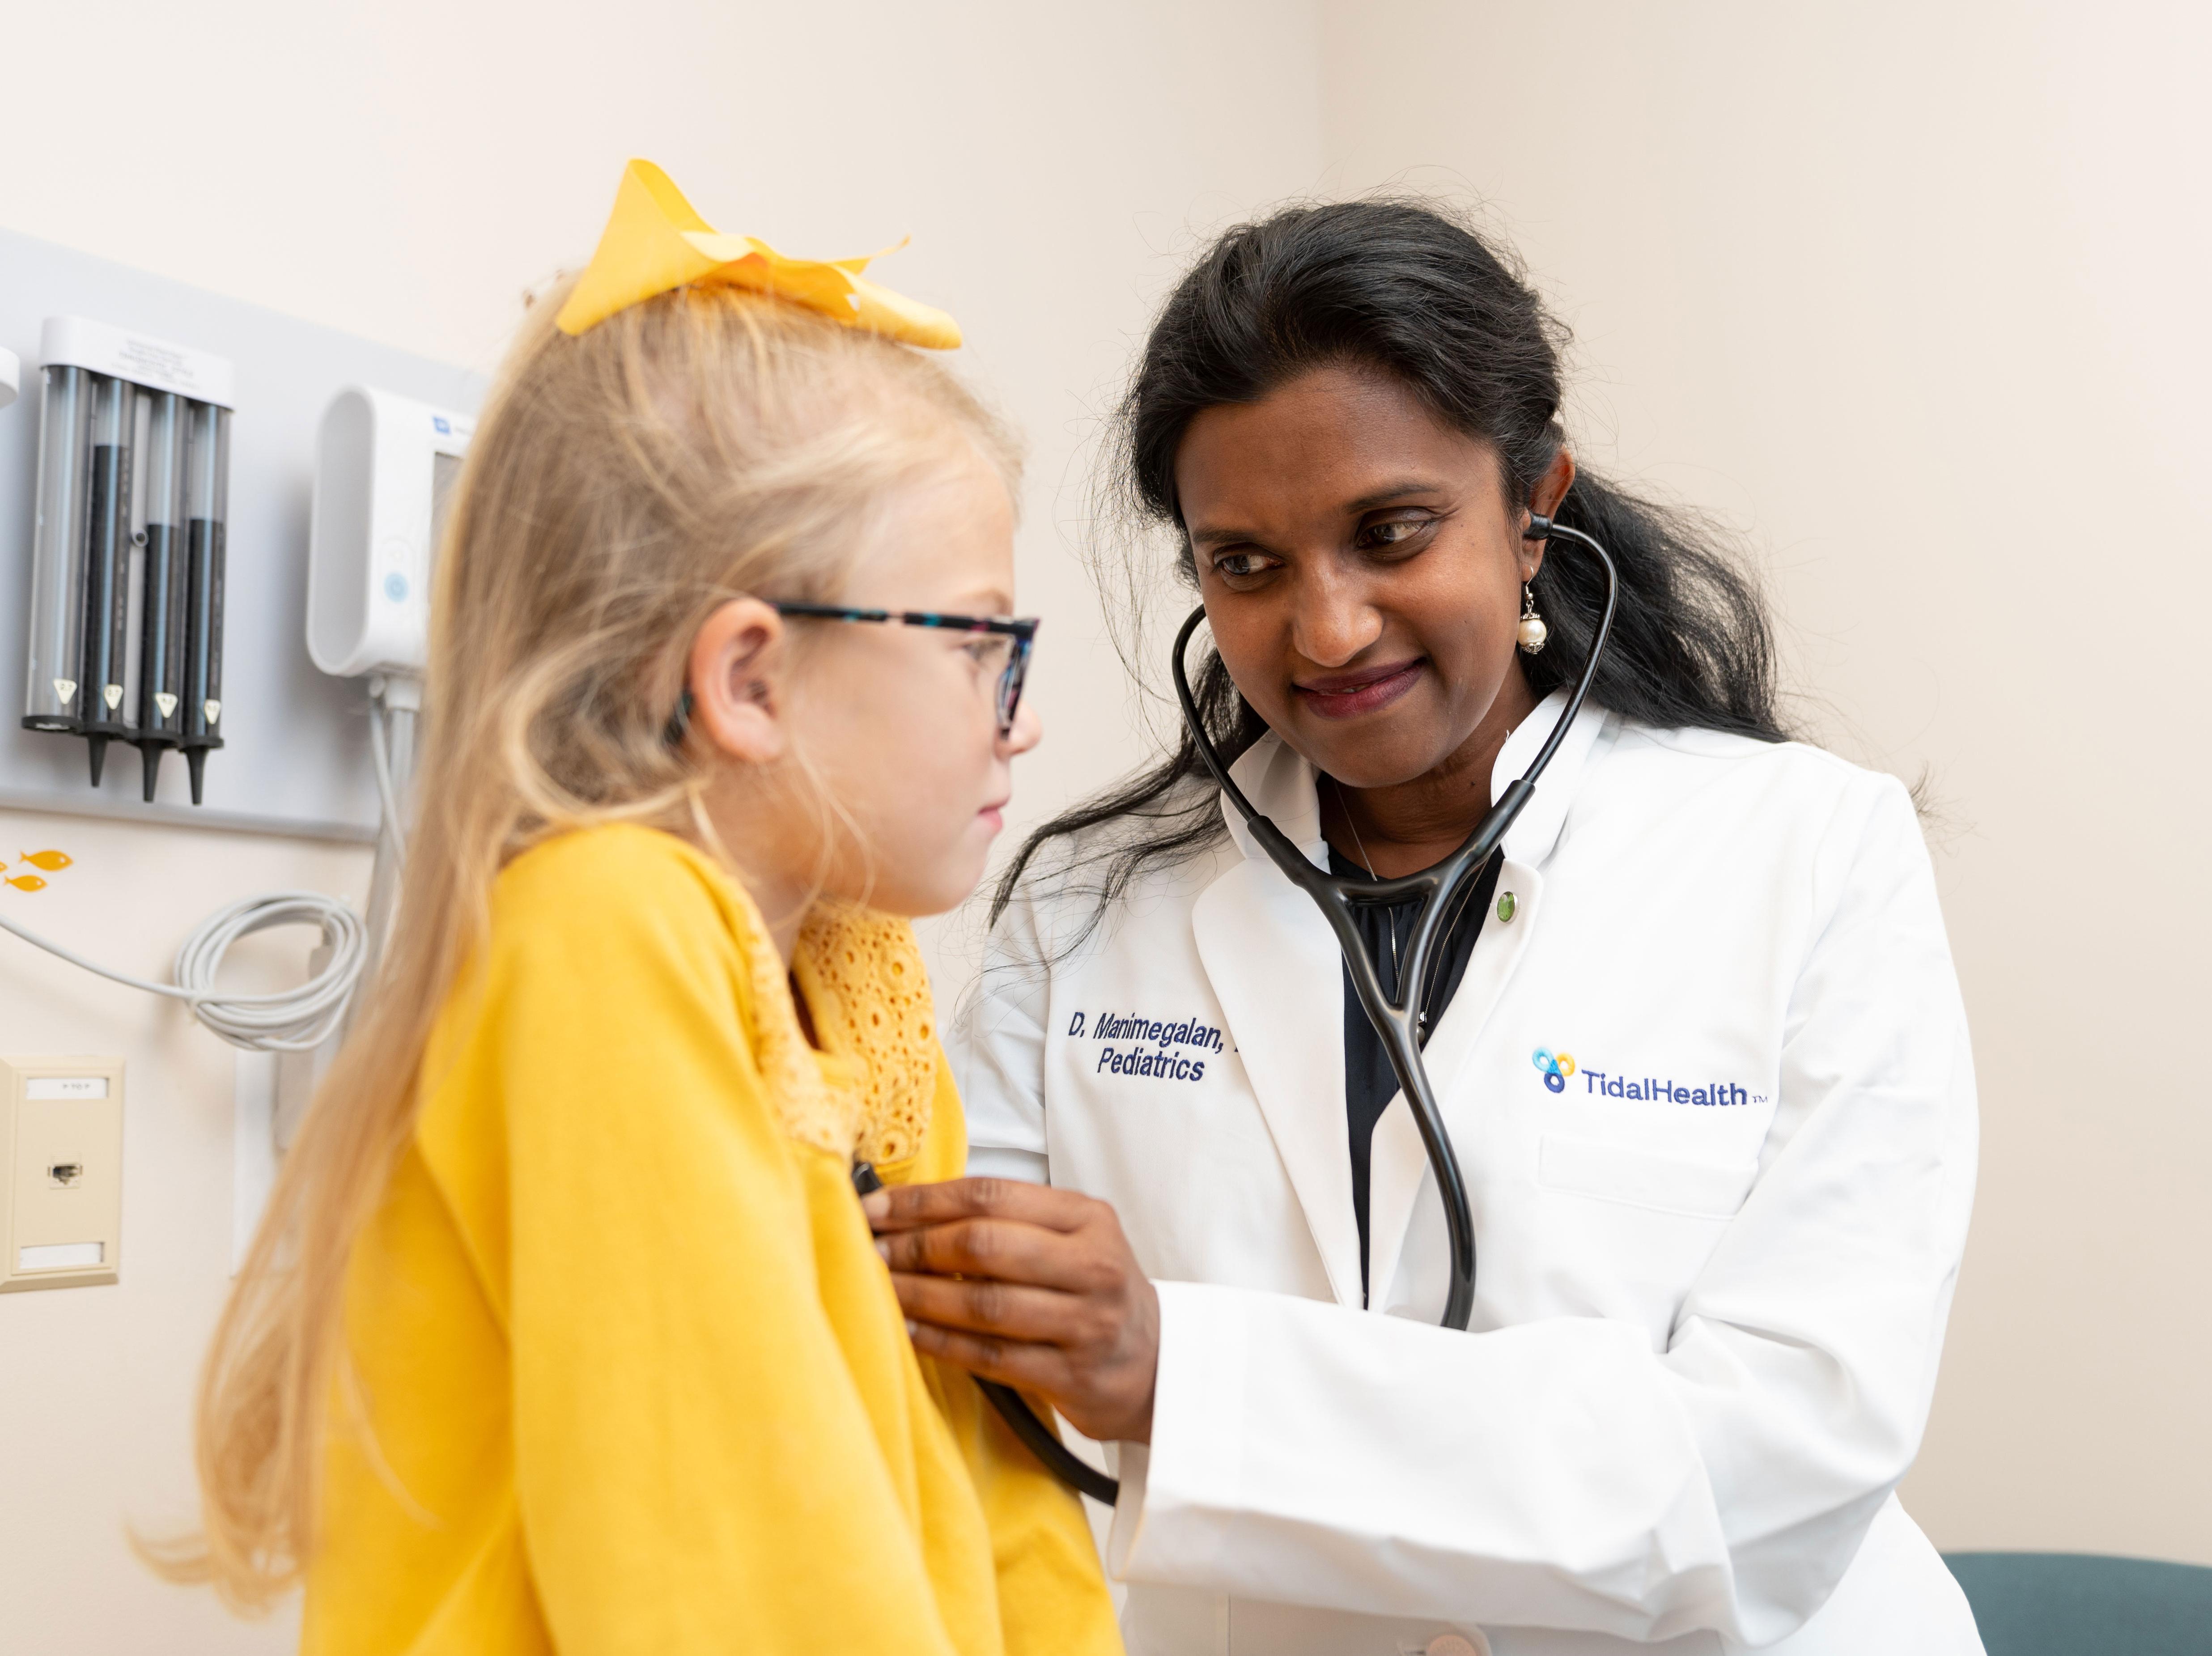 Experienced pediatrician conducting a thorough examination on a young patient with care and compassion.